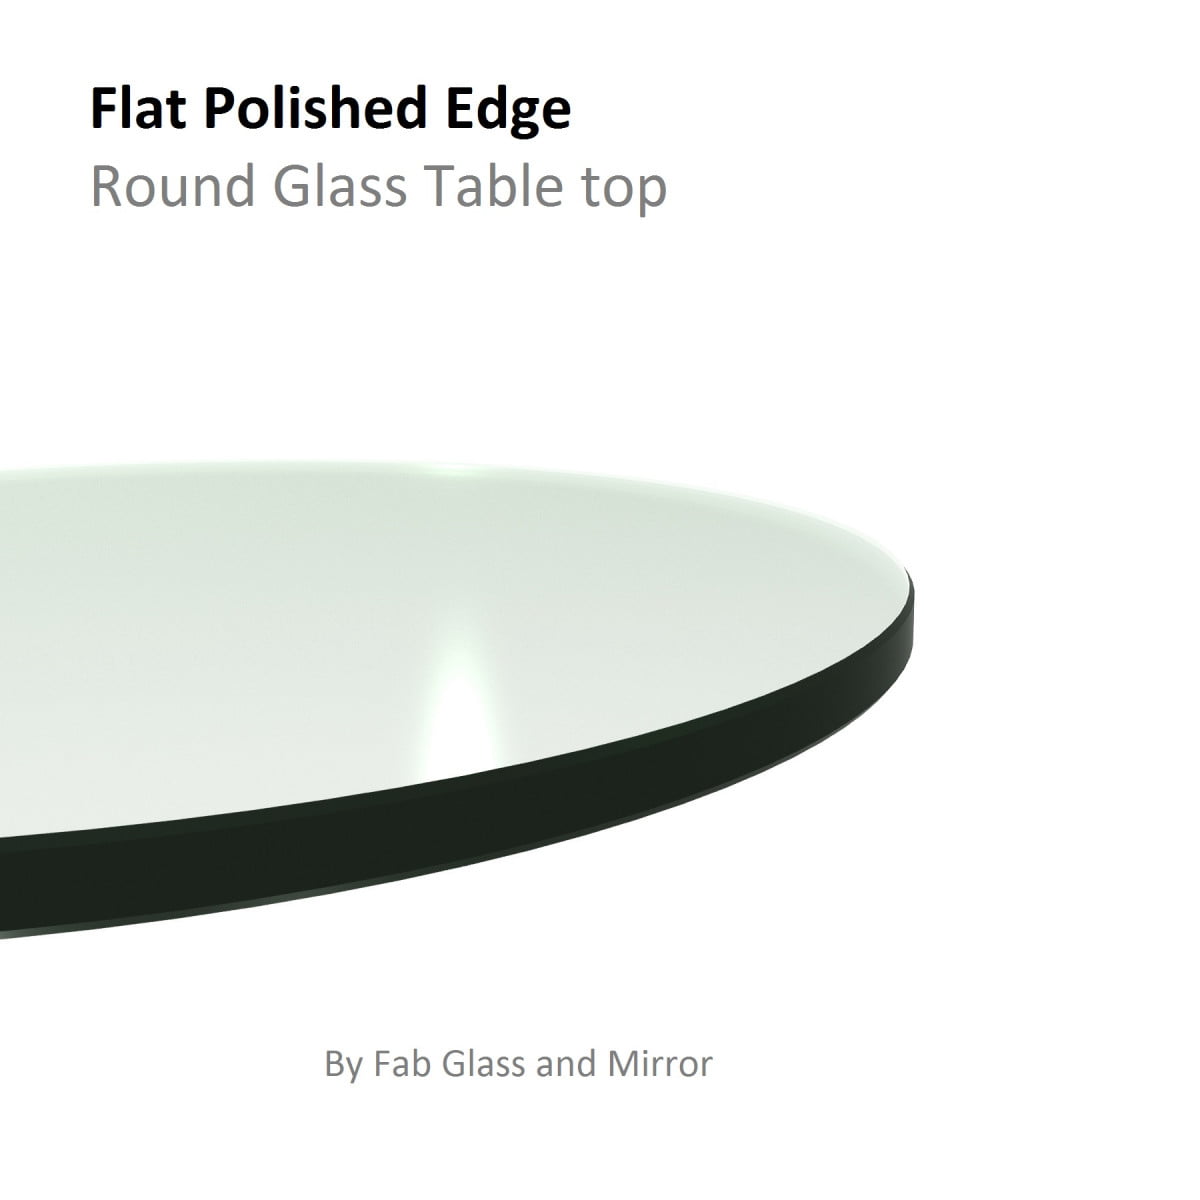 48 Inch Round Patio Glass Table Top 1 4 Thick Clear Tempered With Flat Edge Polished W 2 Hole Com - 48 Acrylic Patio Table Top Replacement